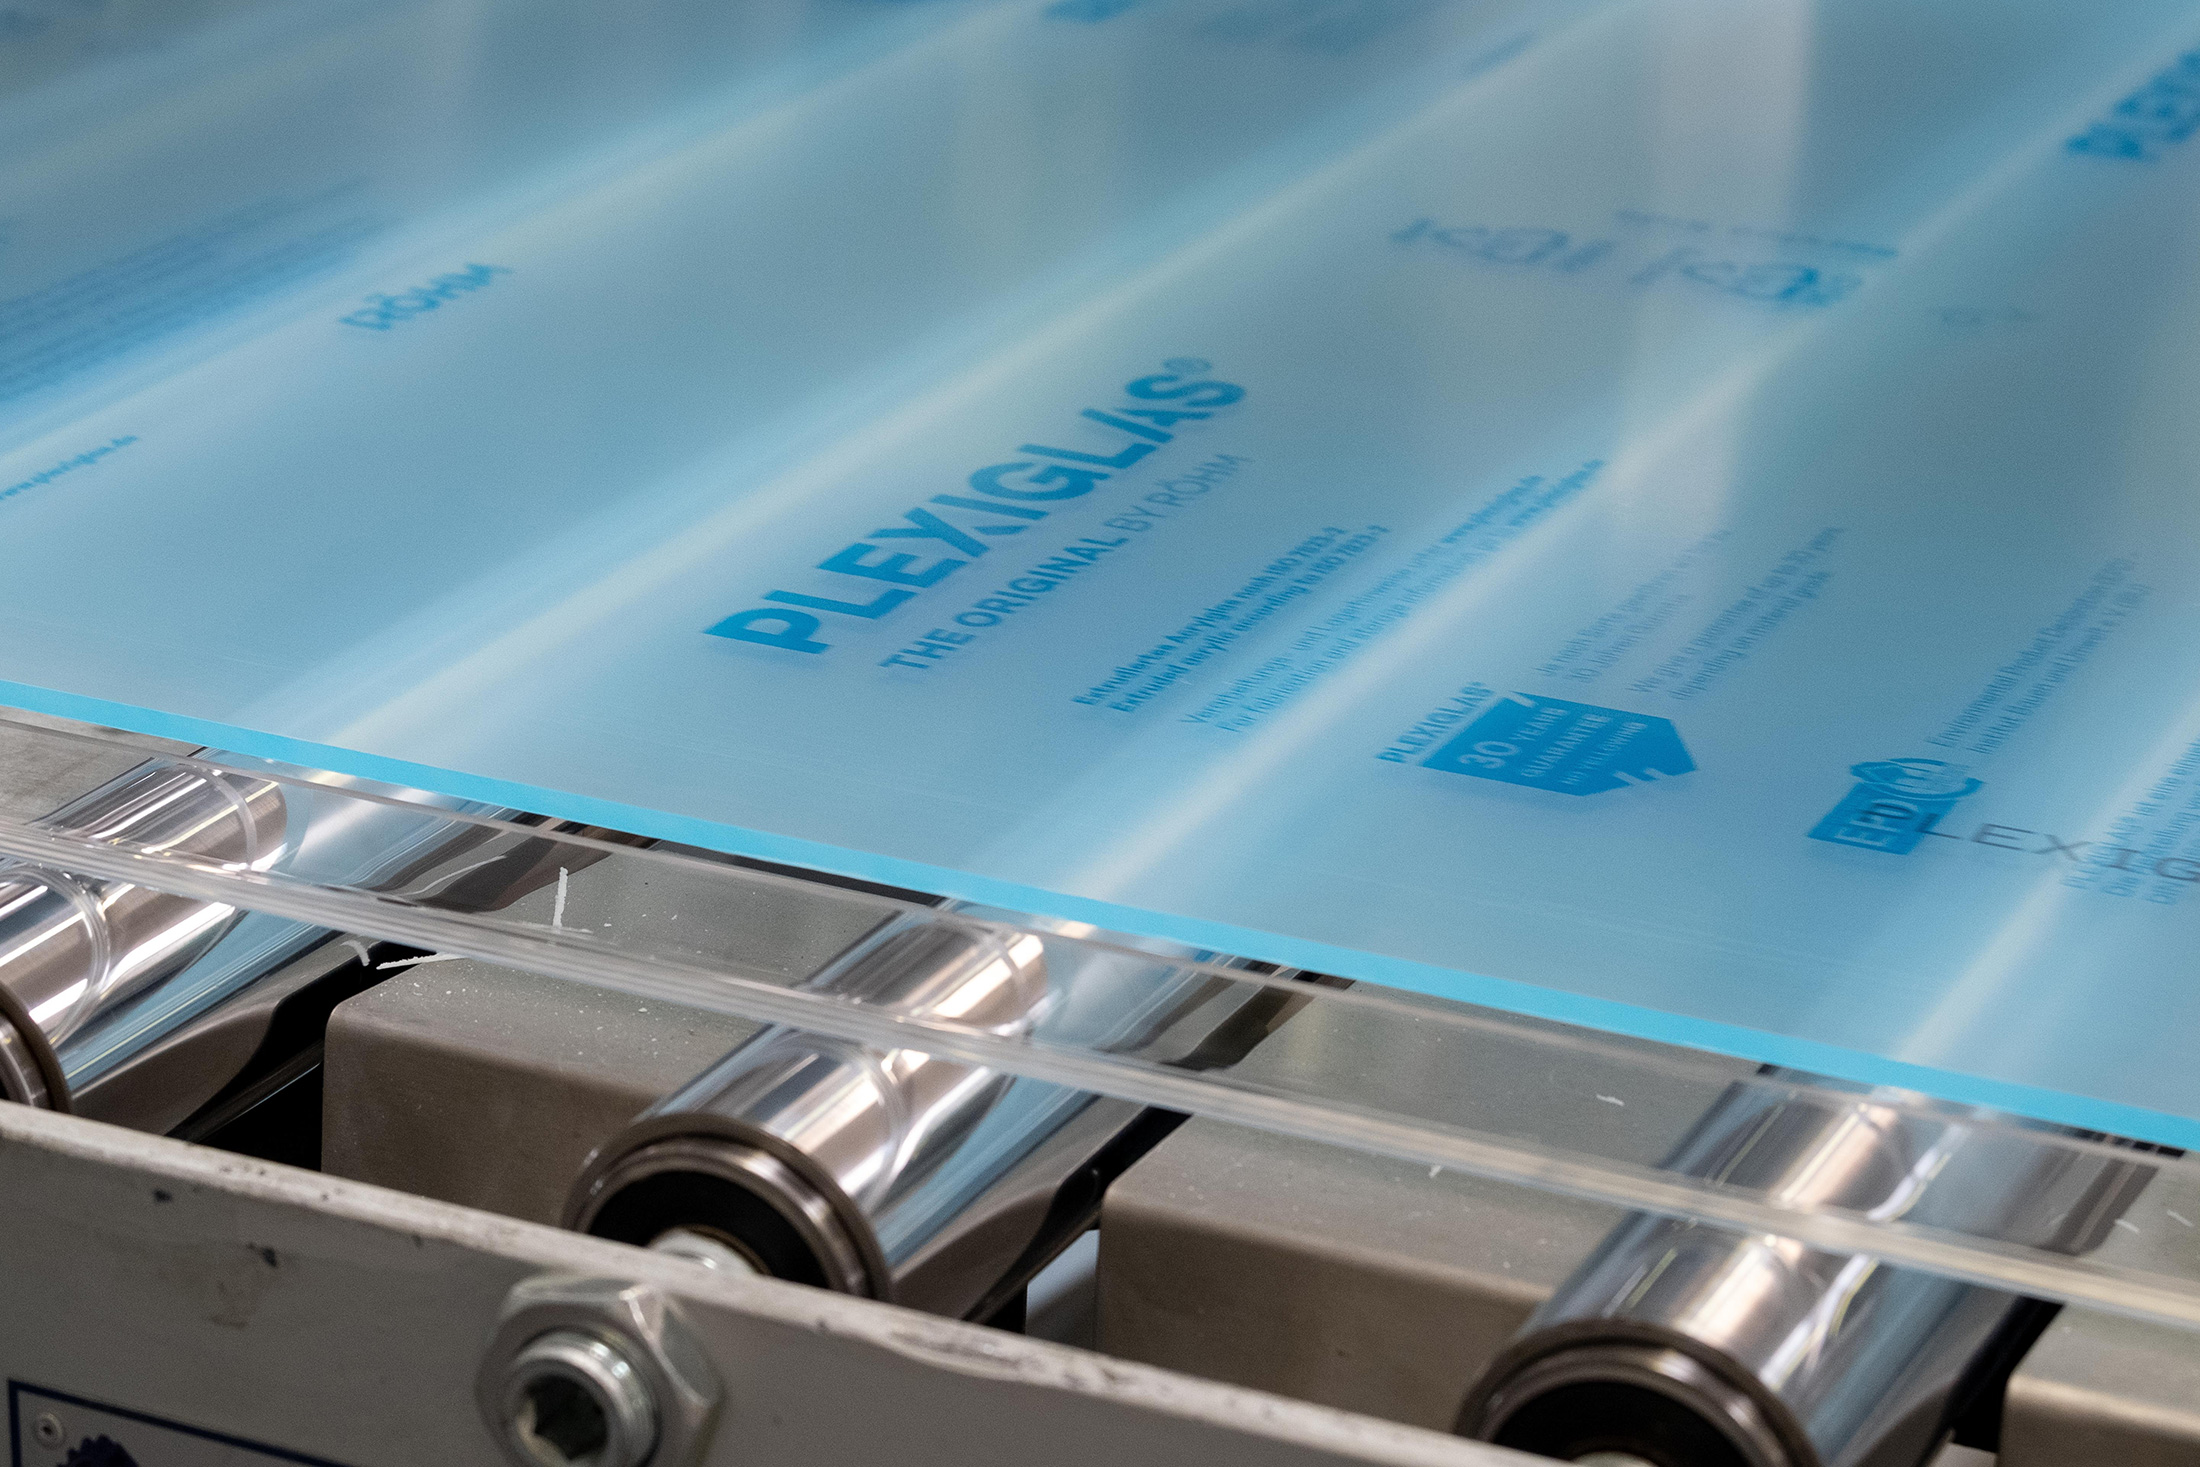 A sheet of Plexiglas at Röhm’s production facility in Weiterstadt, Germany.